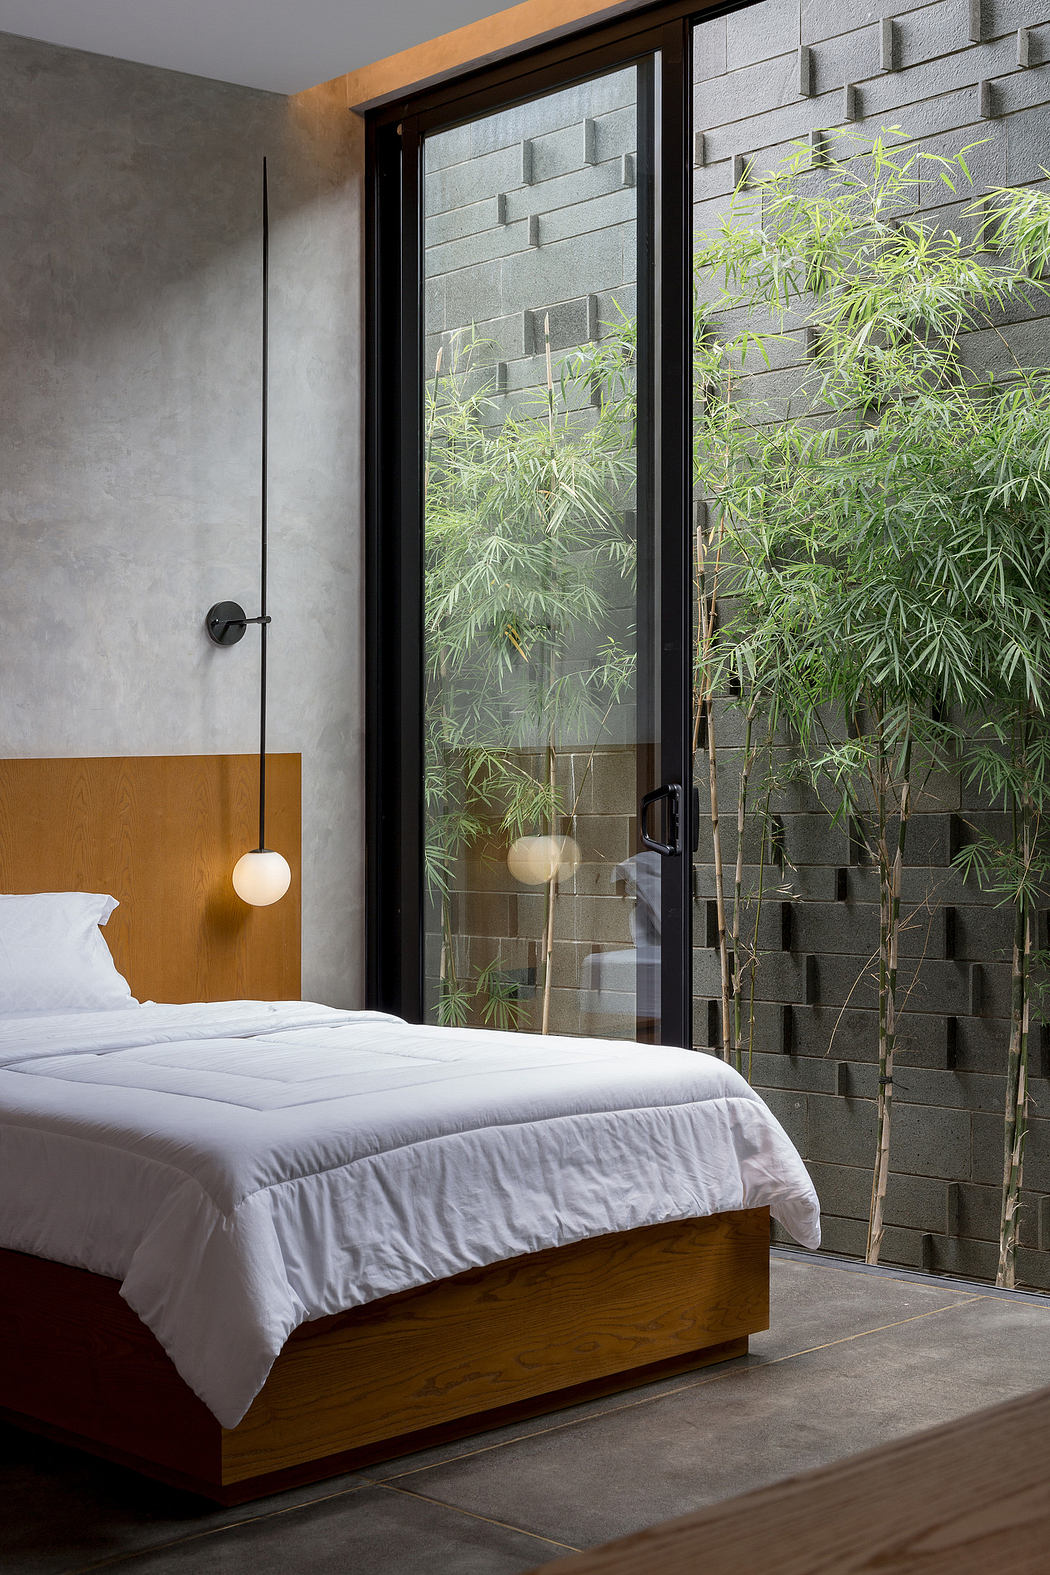 Modern bedroom with sleek wooden bed, large window, and view of bamboo outdoors.